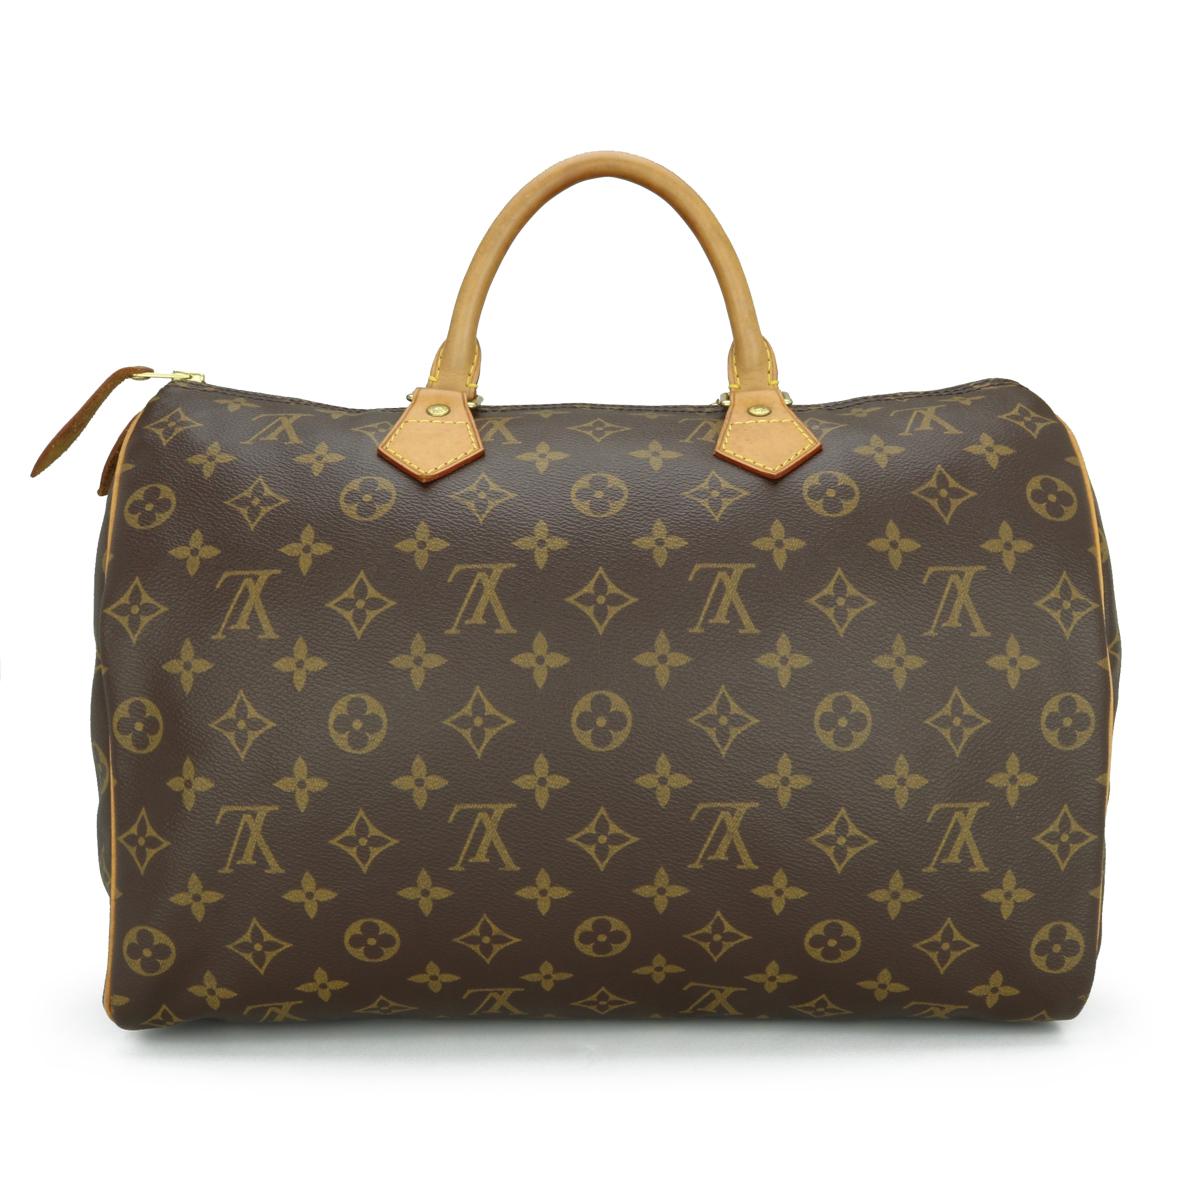 Louis Vuitton Speedy 35 Bag in Monogram 2005.

This bag is in good condition. 

- Exterior Condition: Good condition. Light storage creasing to the canvas. The outside of the bag shows signs of wear - leather/print surface rubbing to four base